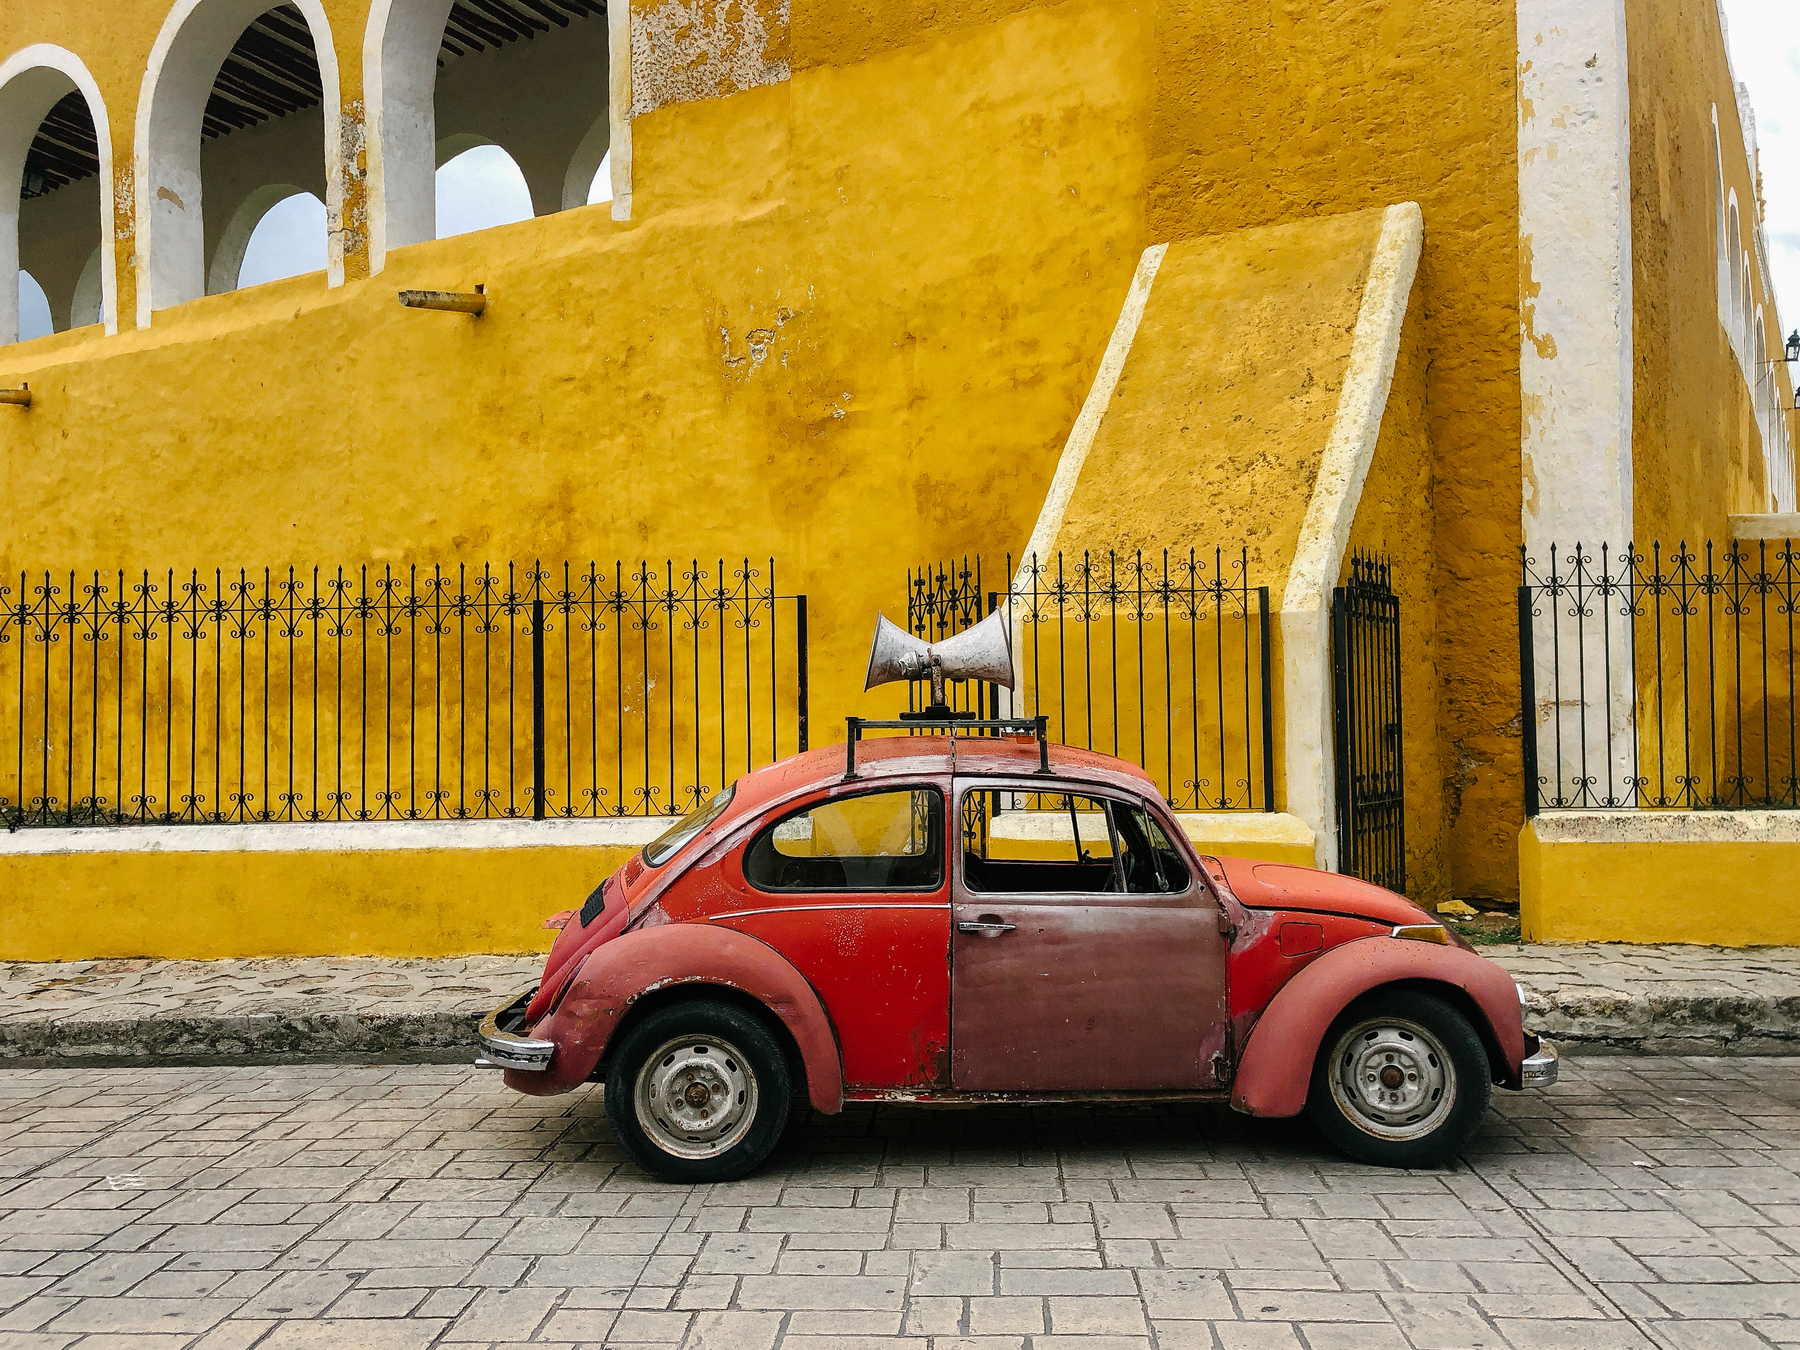 A red car parked in front of a yellow monastery.